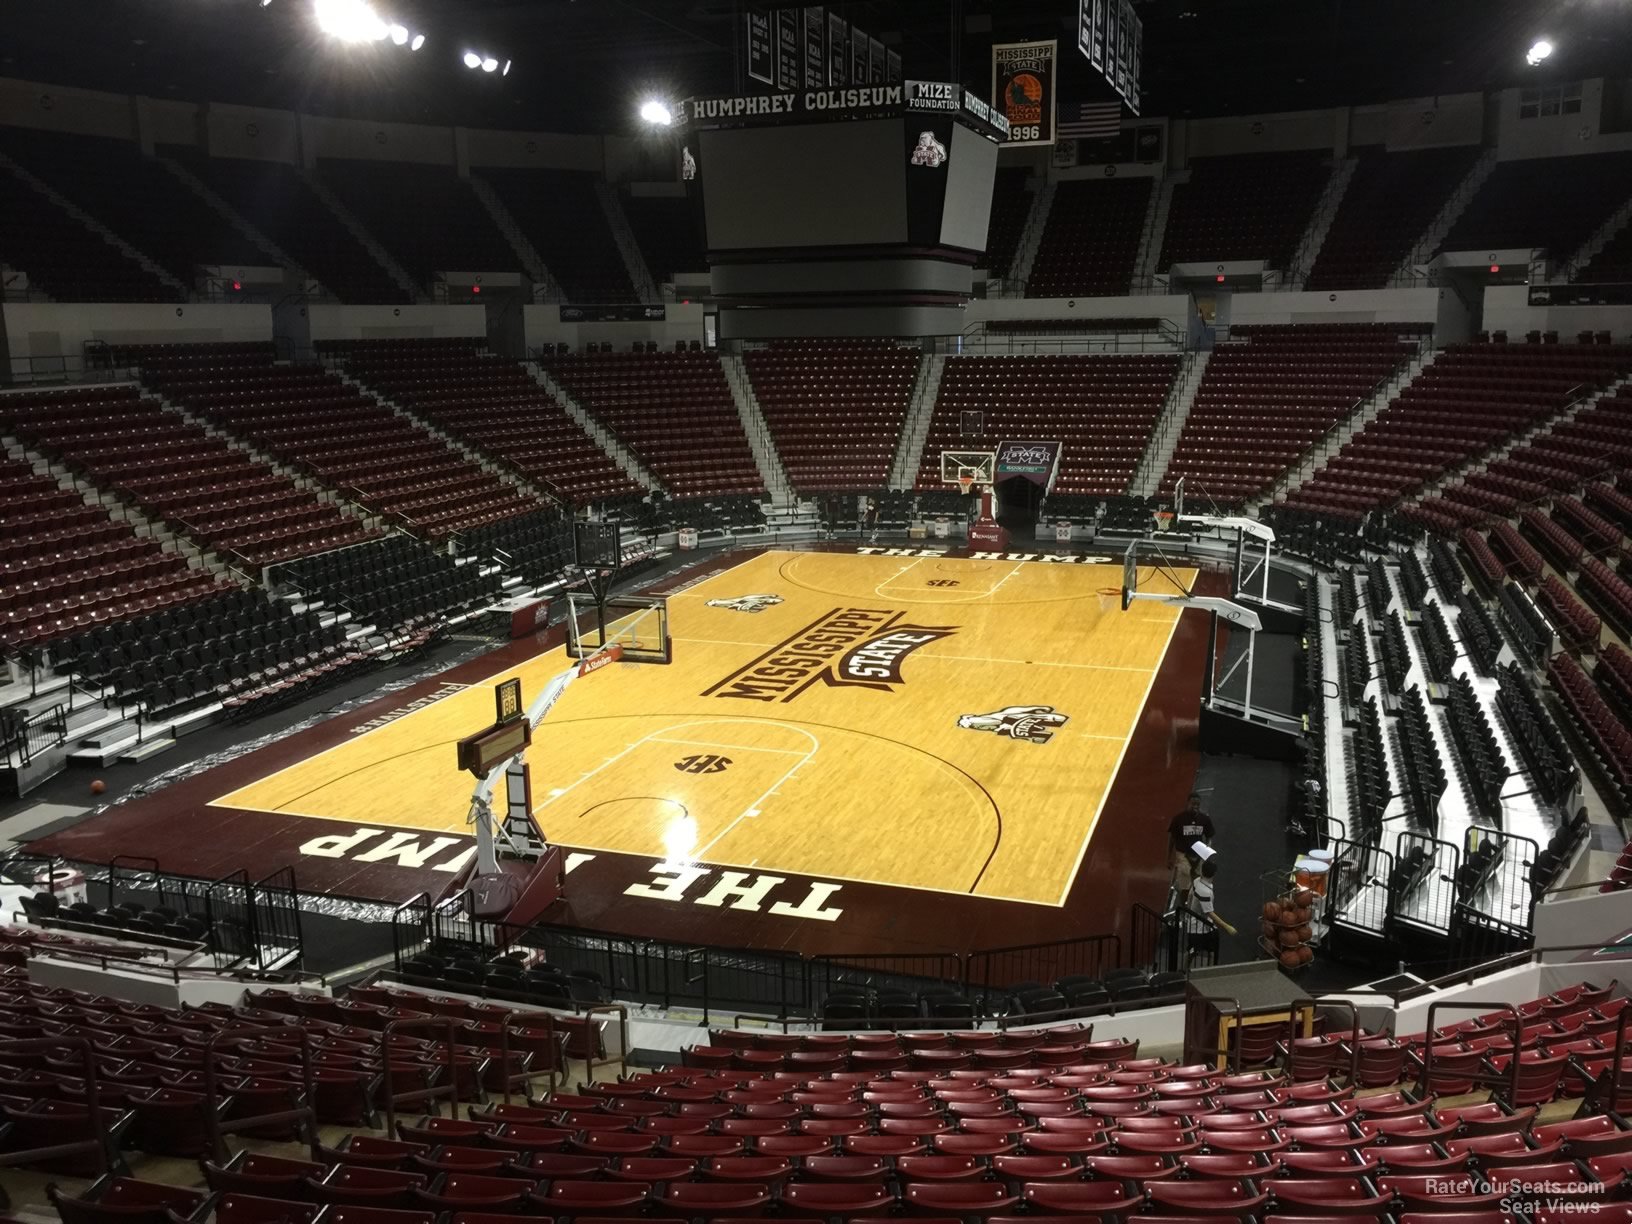 section 110, row 15 seat view  - humphrey coliseum